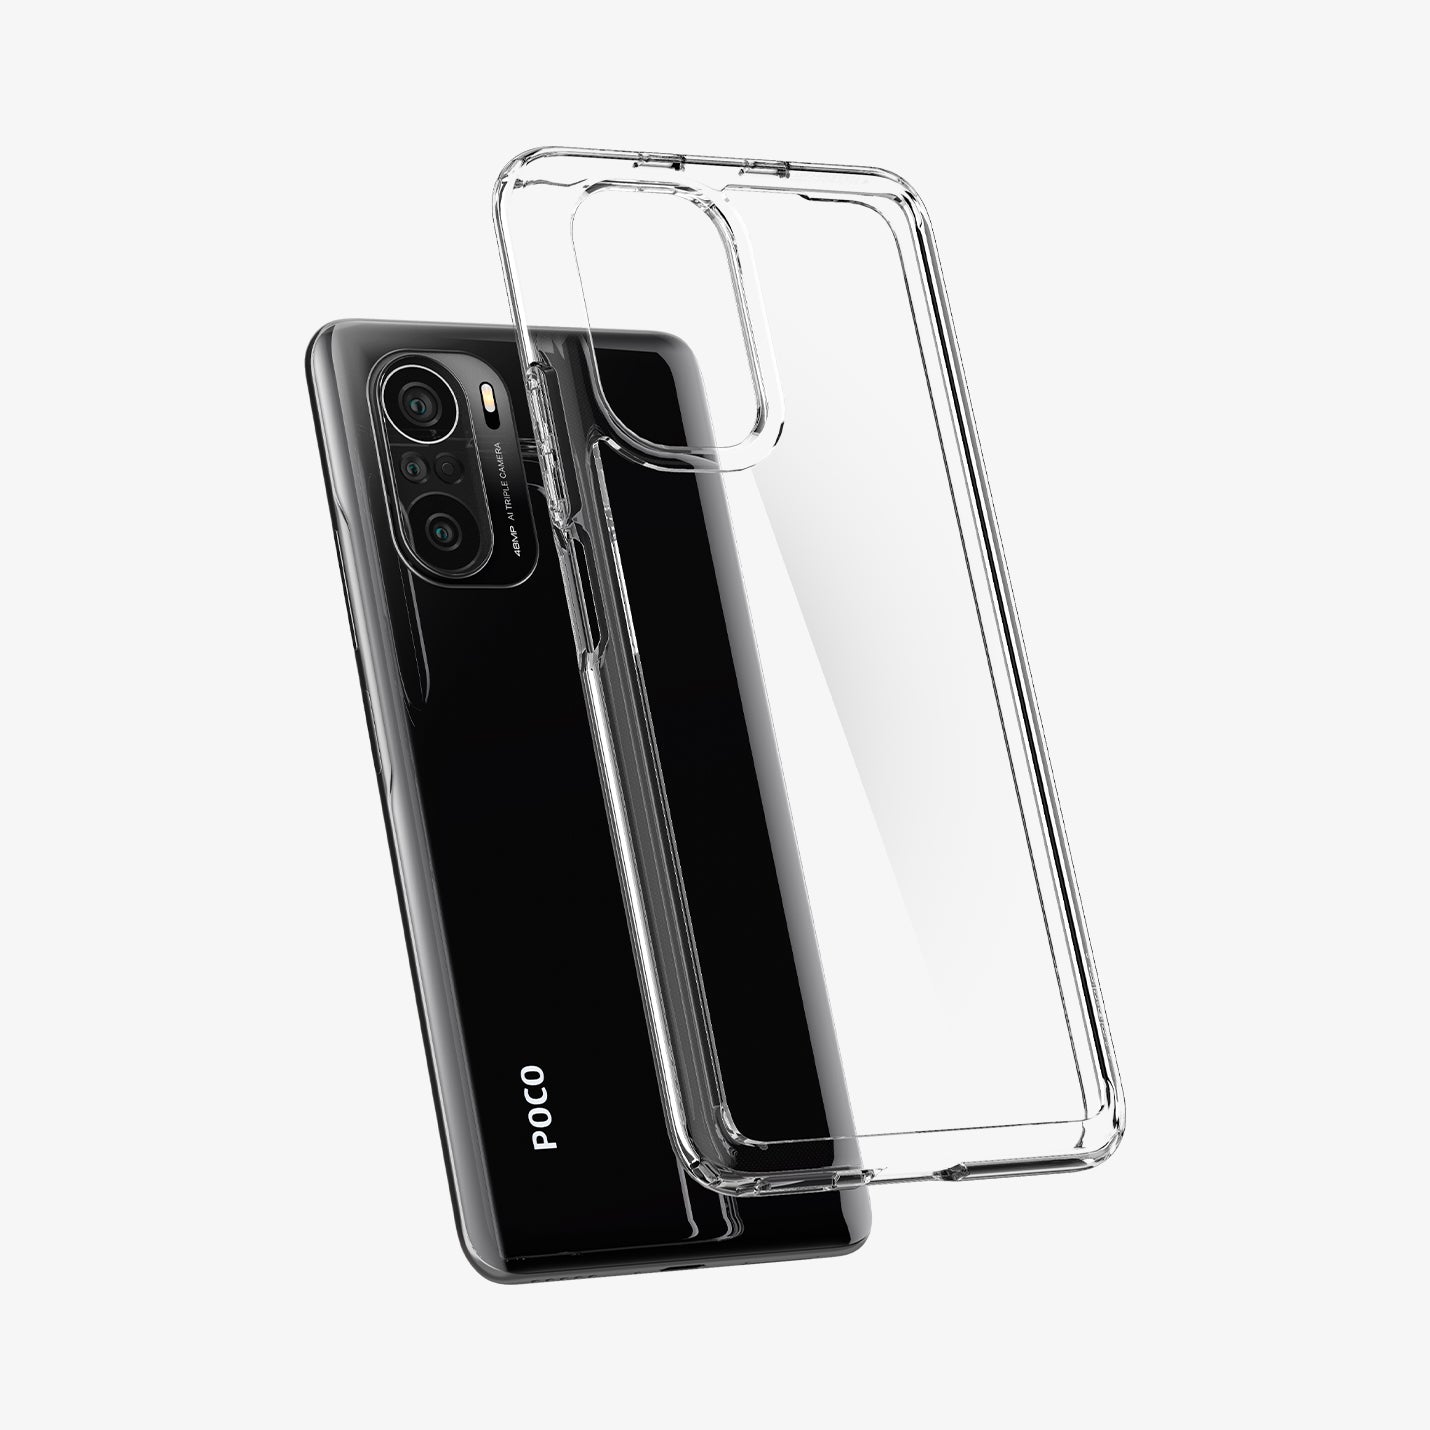 ACS03142 - Xiaomi POCO F3 Ultra Hybrid Case in Crystal Clear showing the back of transparent case hovering above the device